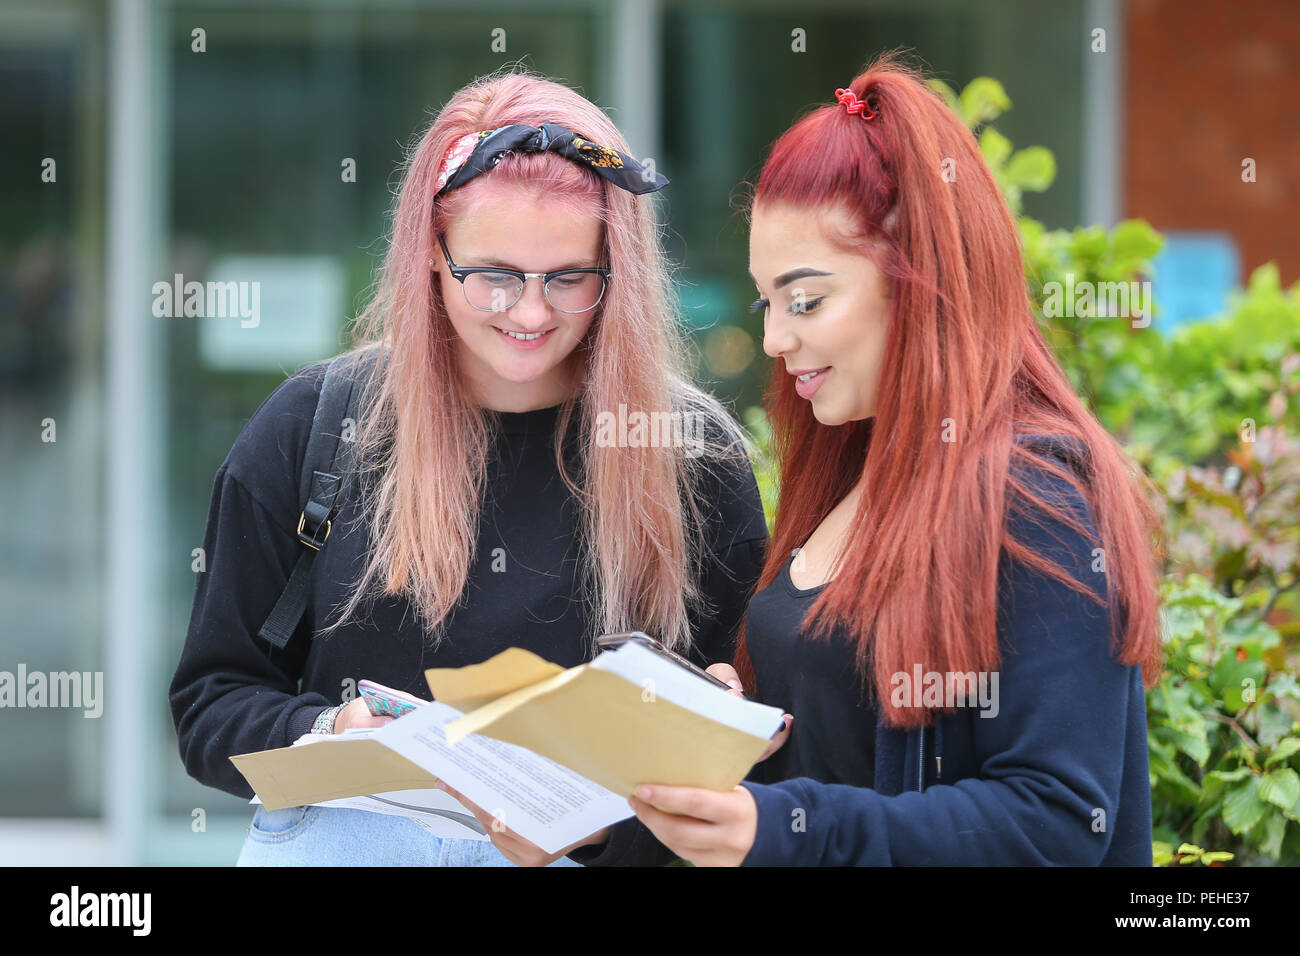 Bromsgrove, Worcestershire, UK. 16th August, 2018. Sixth form students receive their results at North Bromsgrove High School, Bromsgrove, Worcestershire this morning. Peter Lopeman/Alamy Live News Credit: Peter Lopeman/Alamy Live News Stock Photo